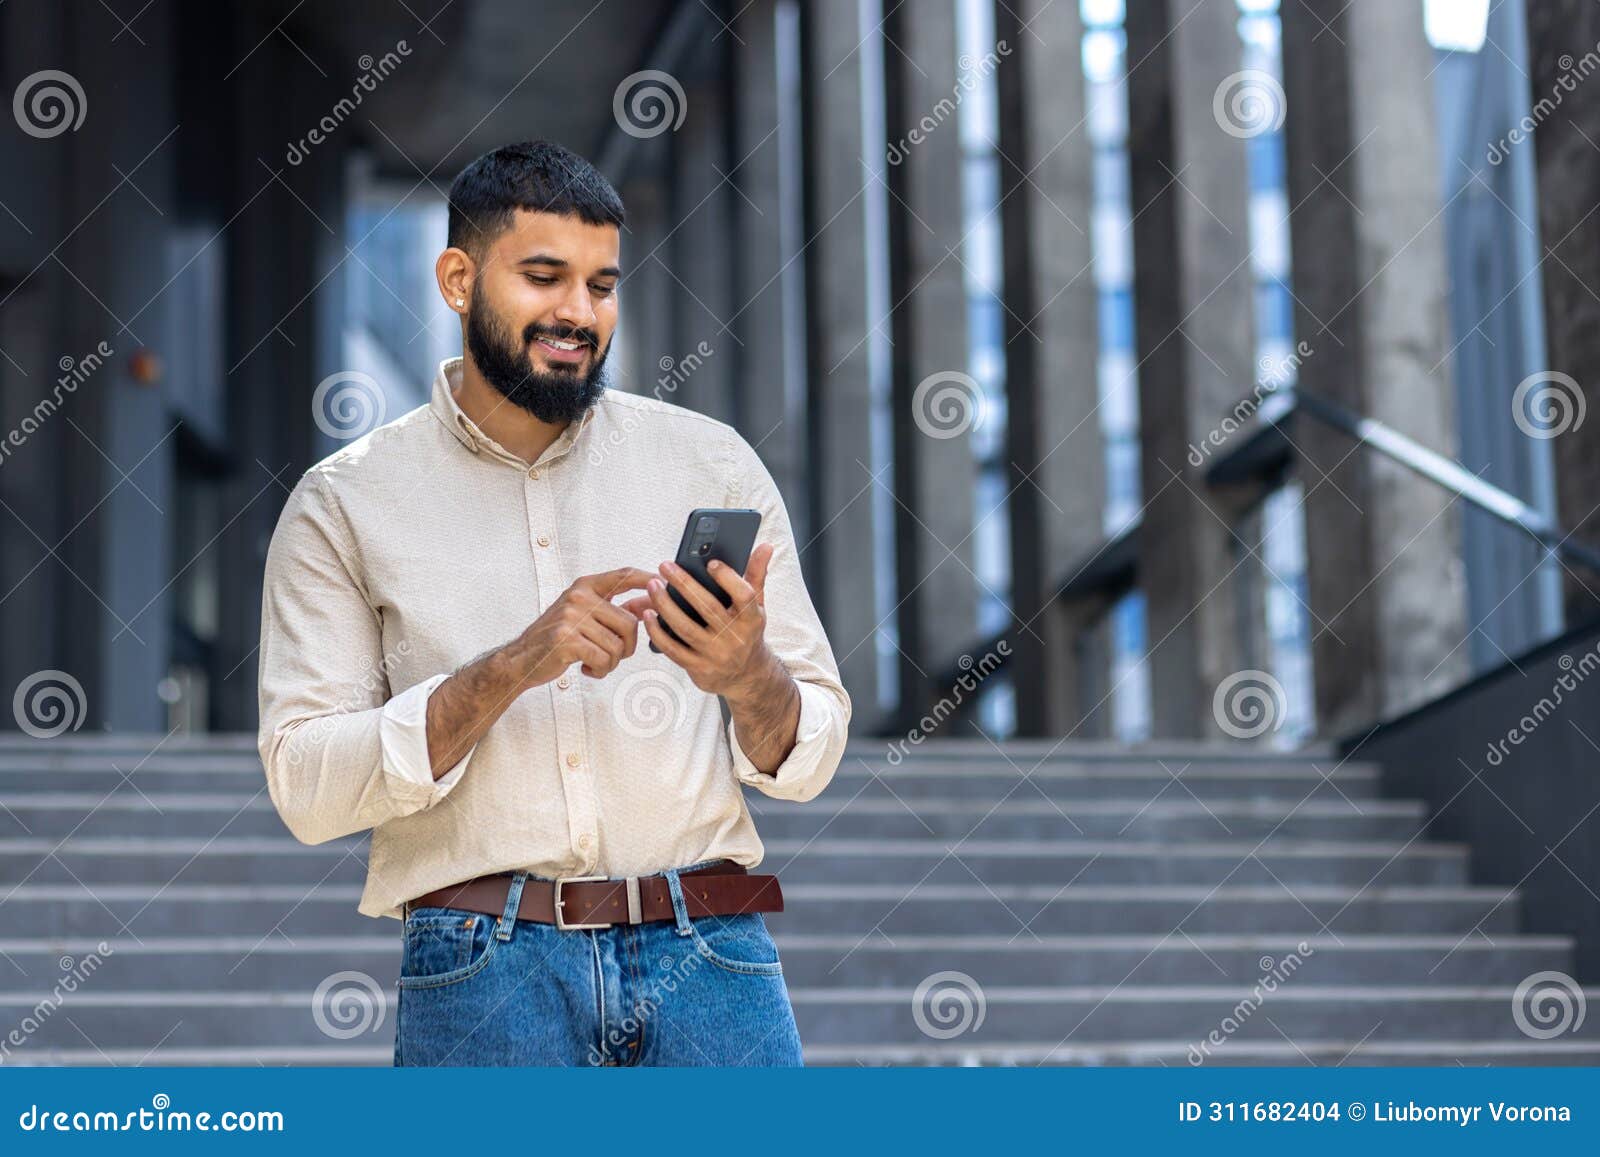 indian young male student standing on campus on stairs near building wearing shirt and jeans and smilingly using mobile